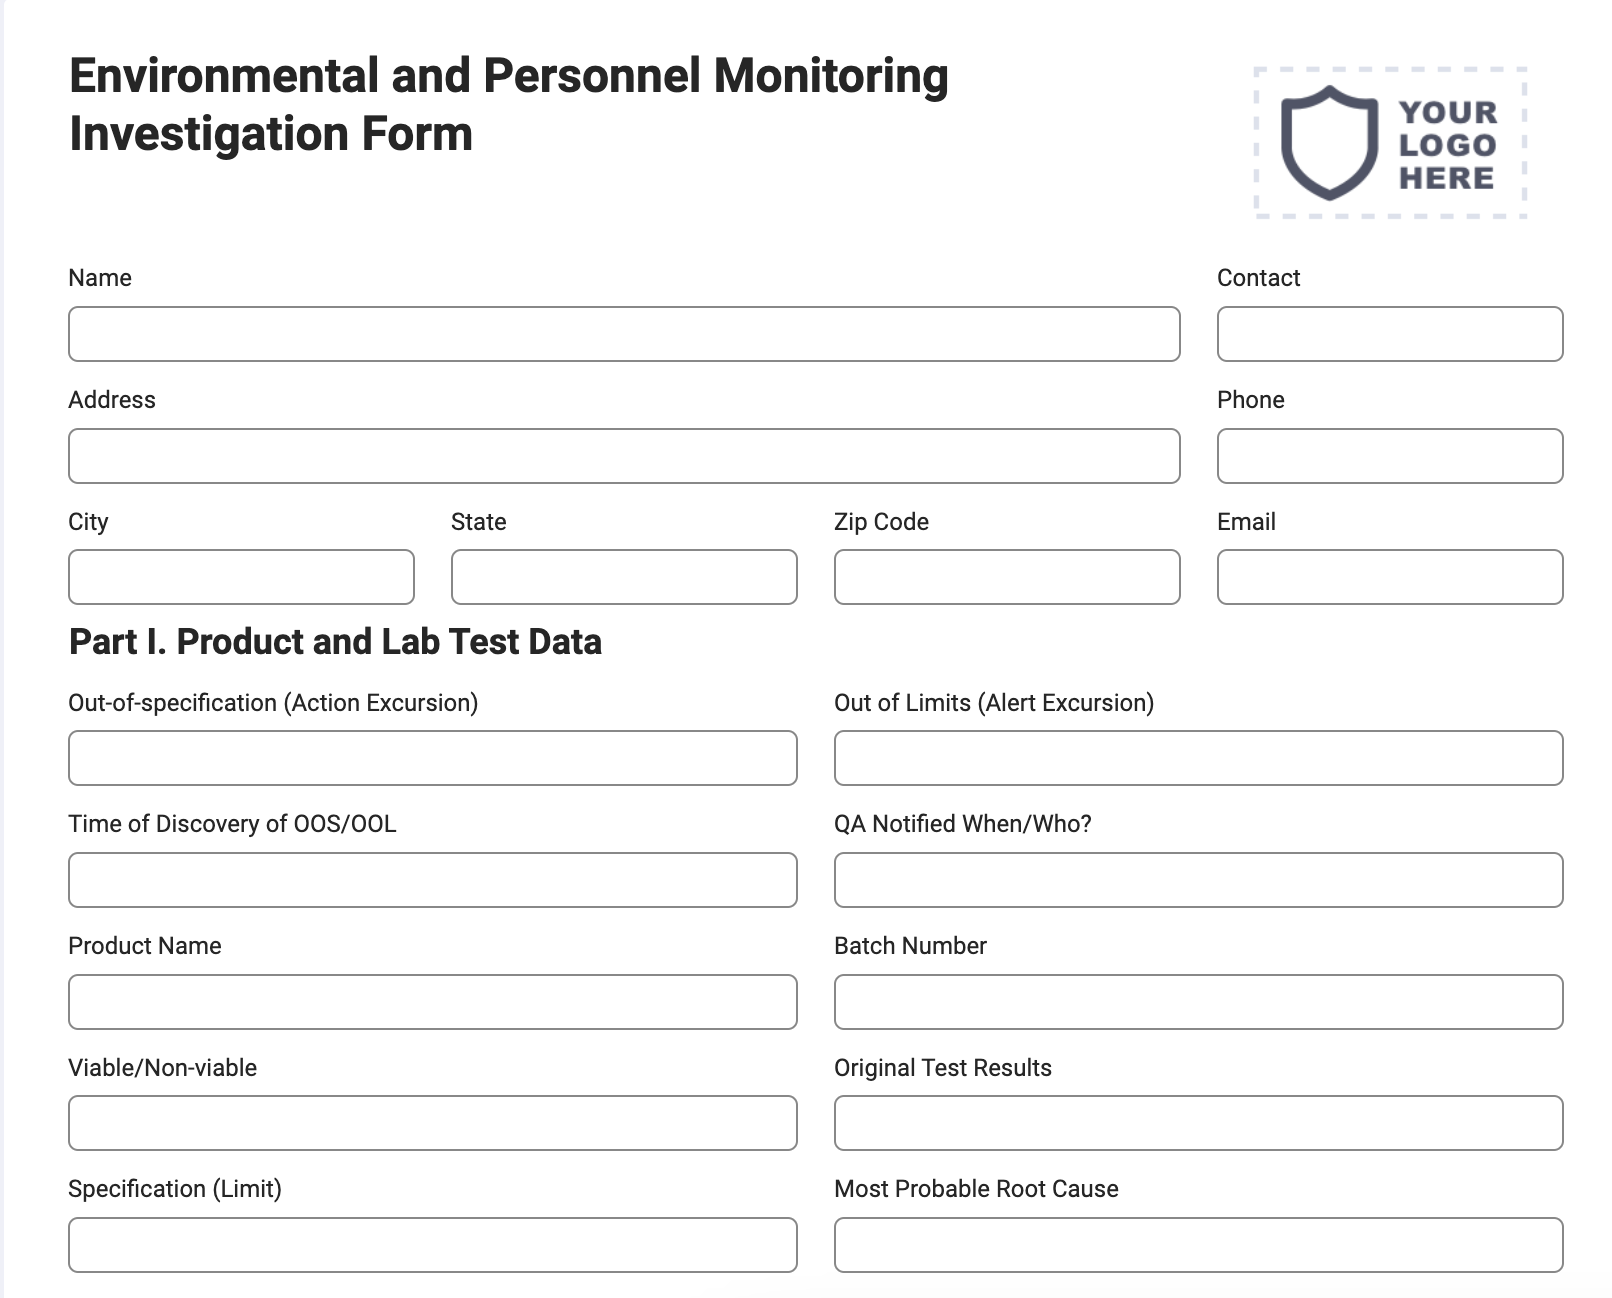 Environmental and Personnel Monitoring Investigation Form